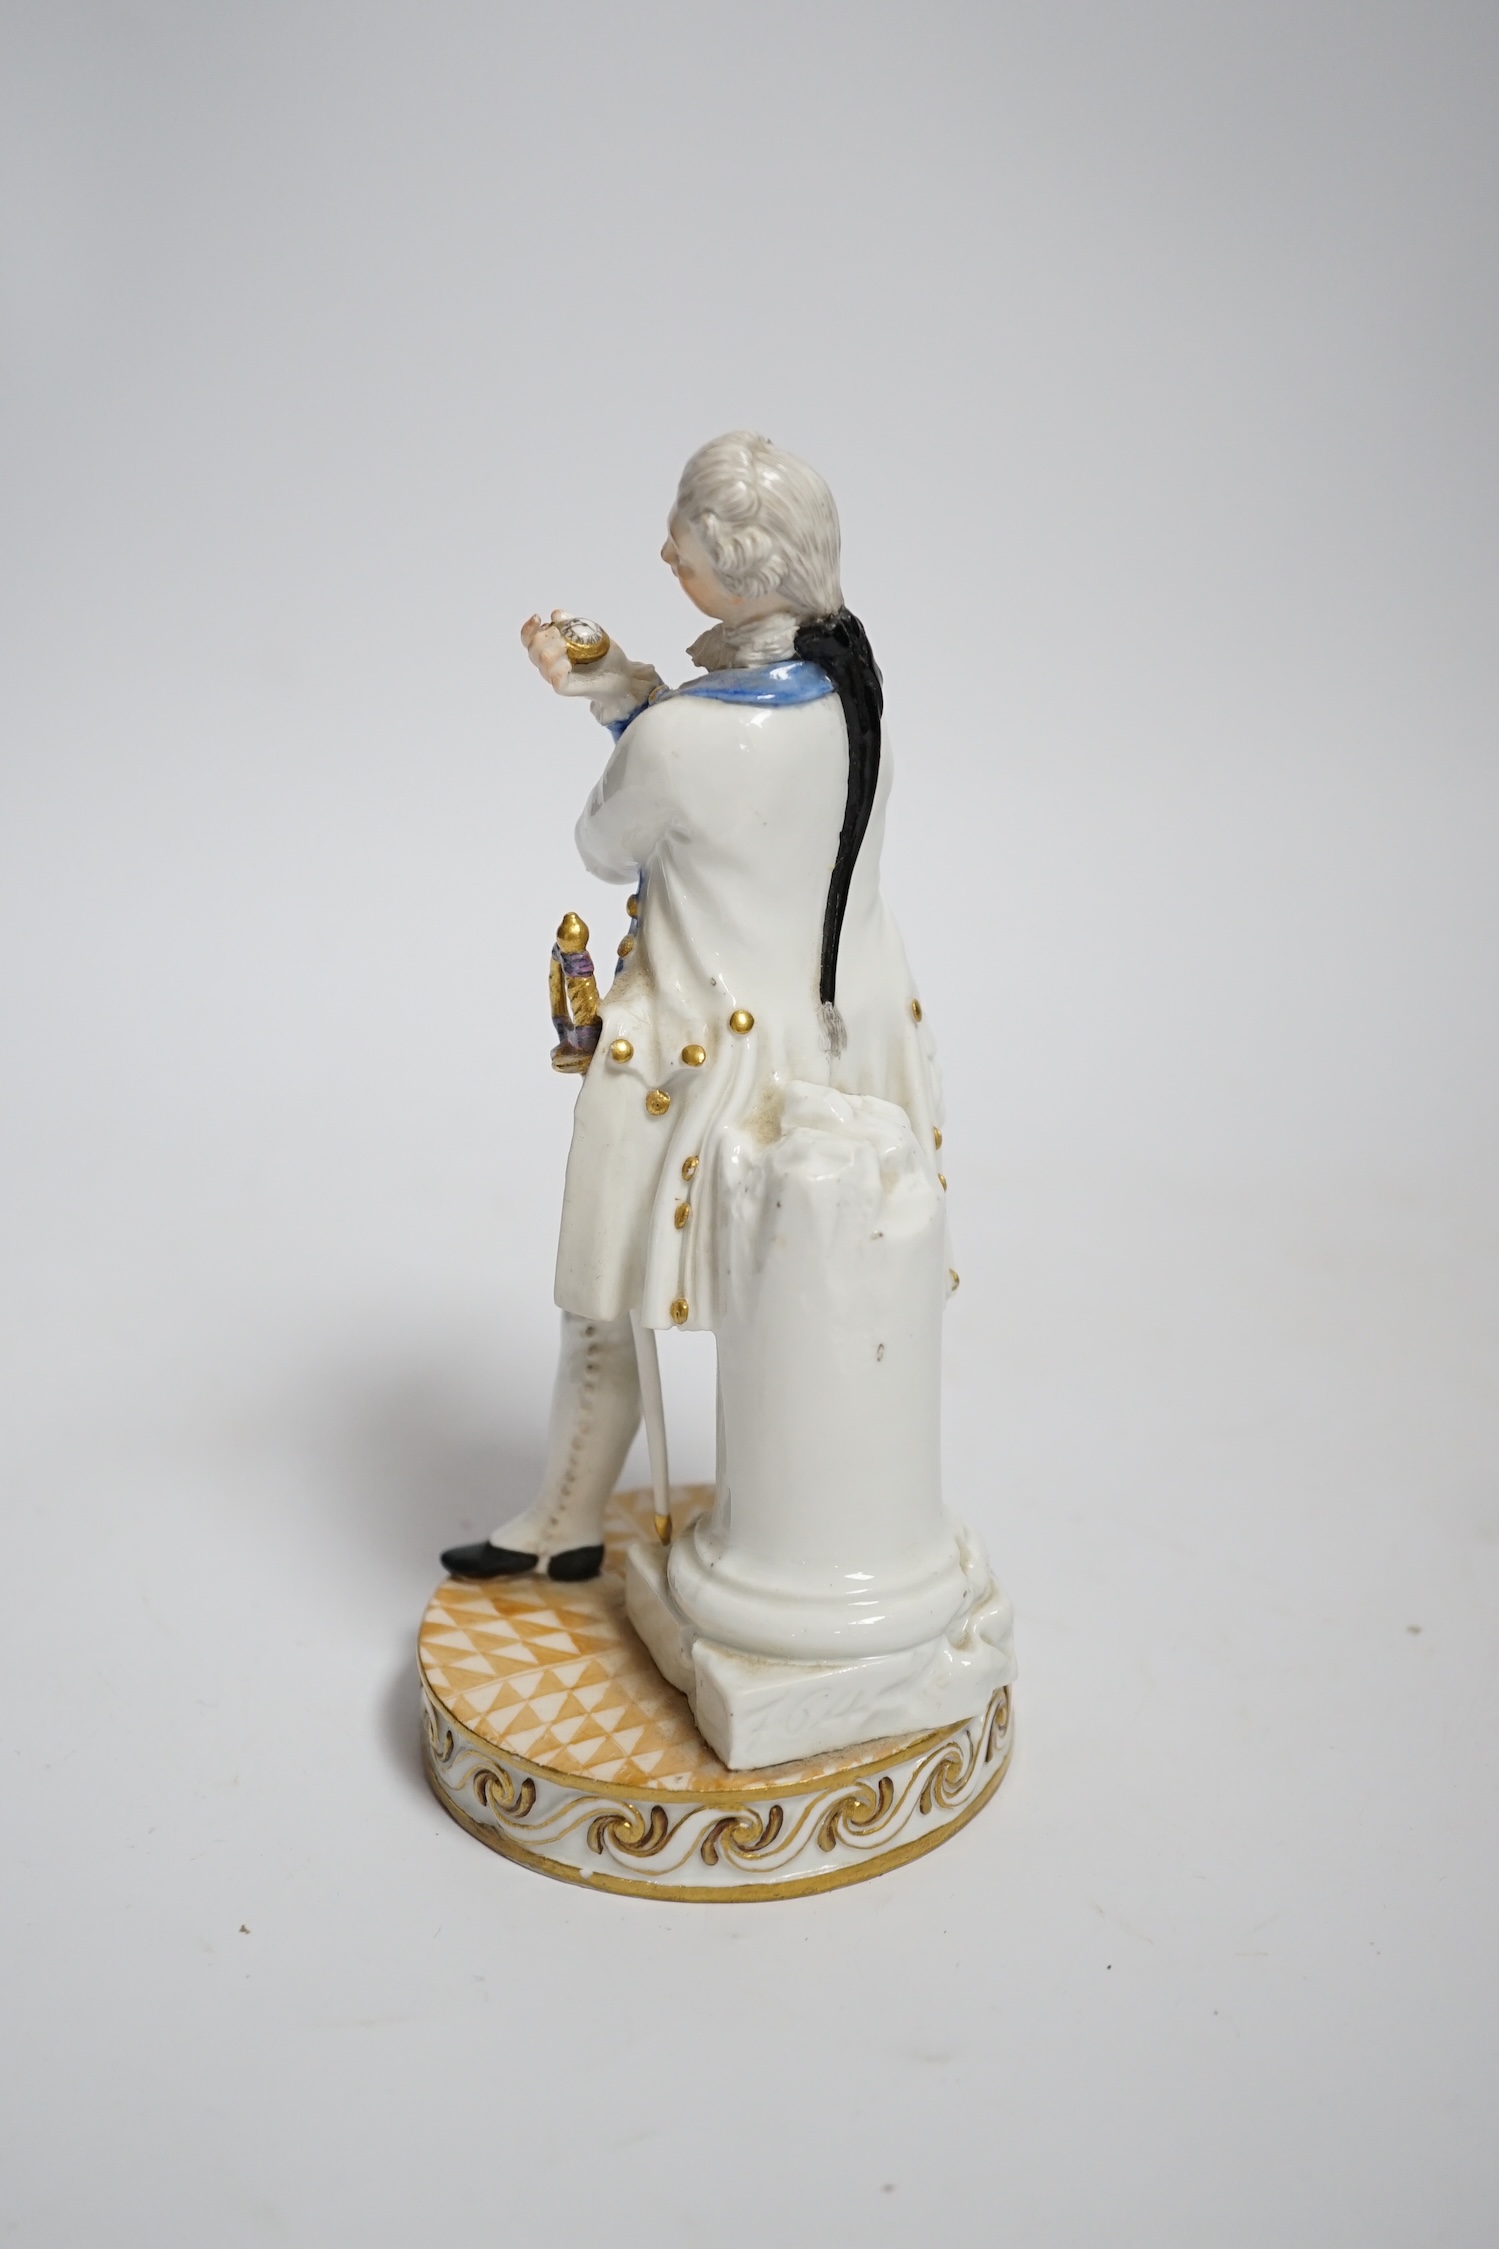 A Meissen style porcelain figure of a soldier in dress uniform with sword and holding aloft a pocket watch, on circular chequerboard decorated base with scrolled edge, height 15cm